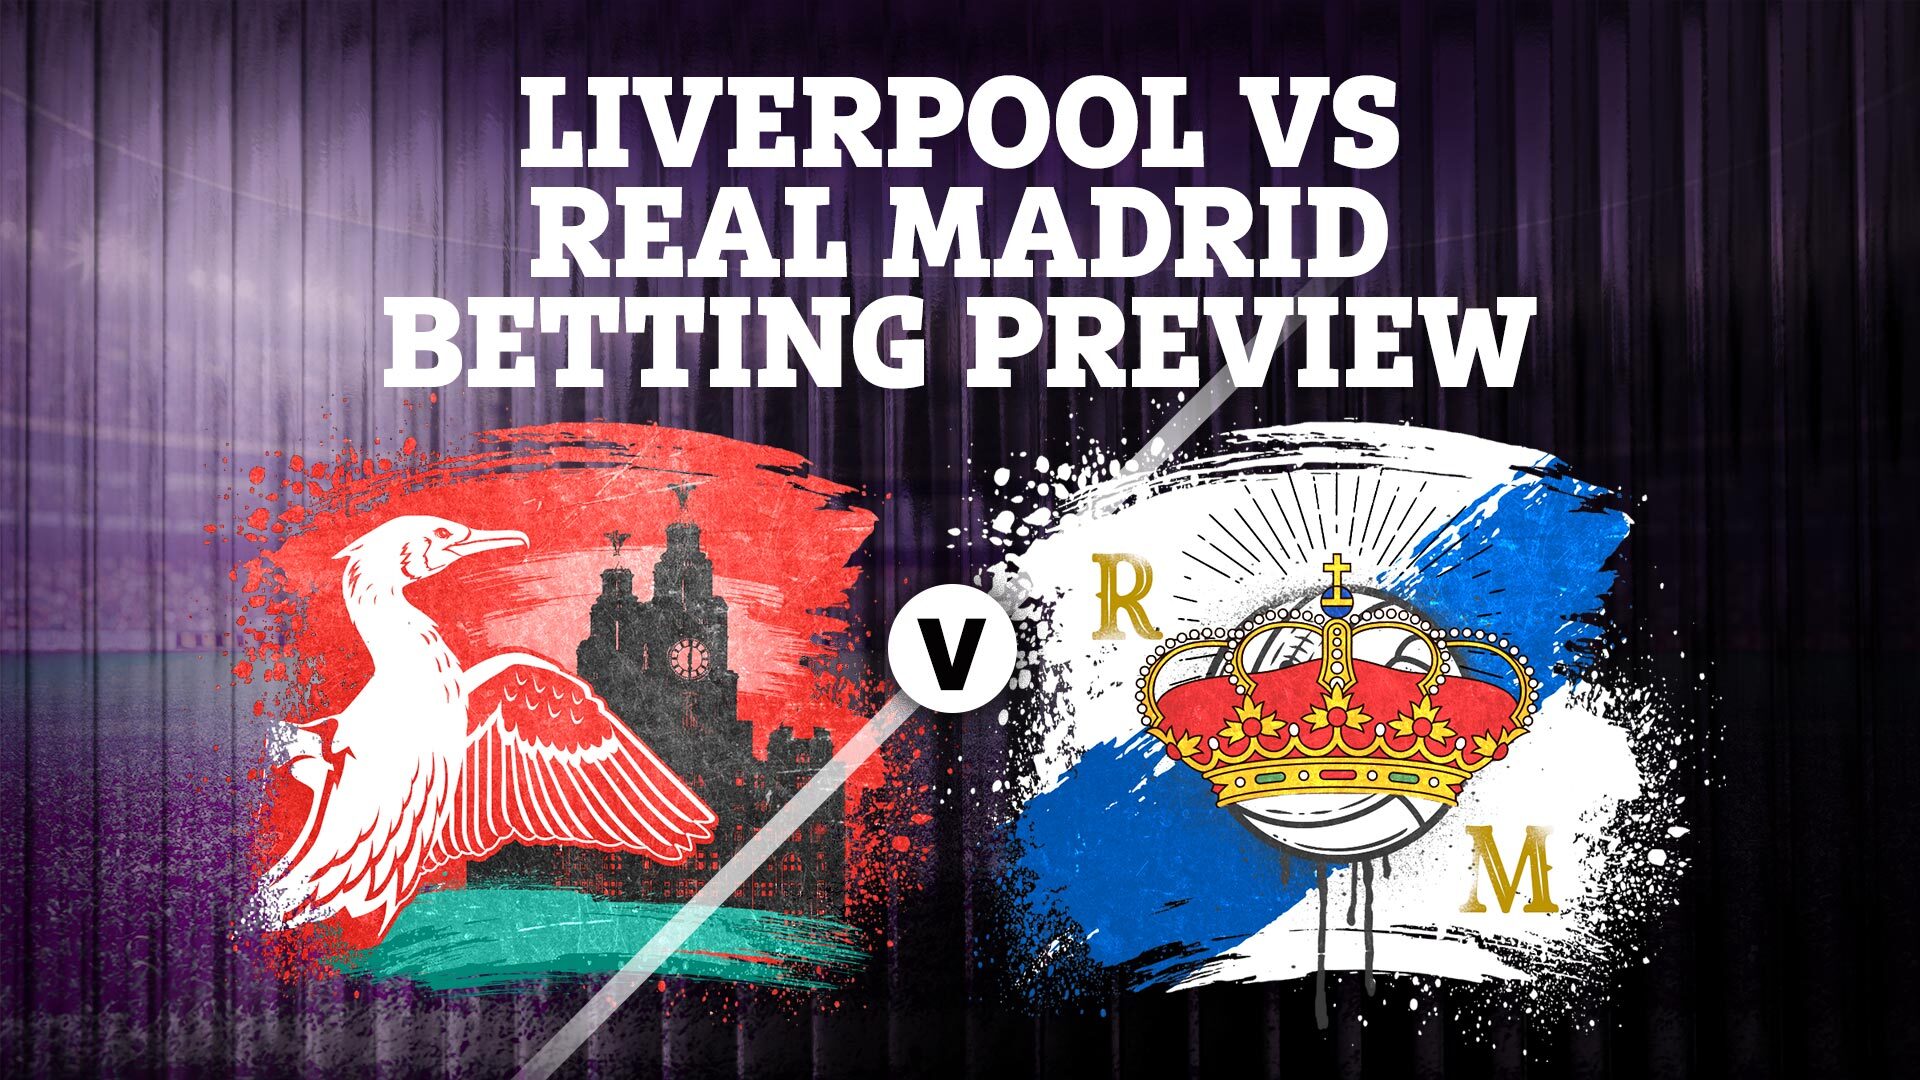 Photo: liverpool vs real madrid betting odds